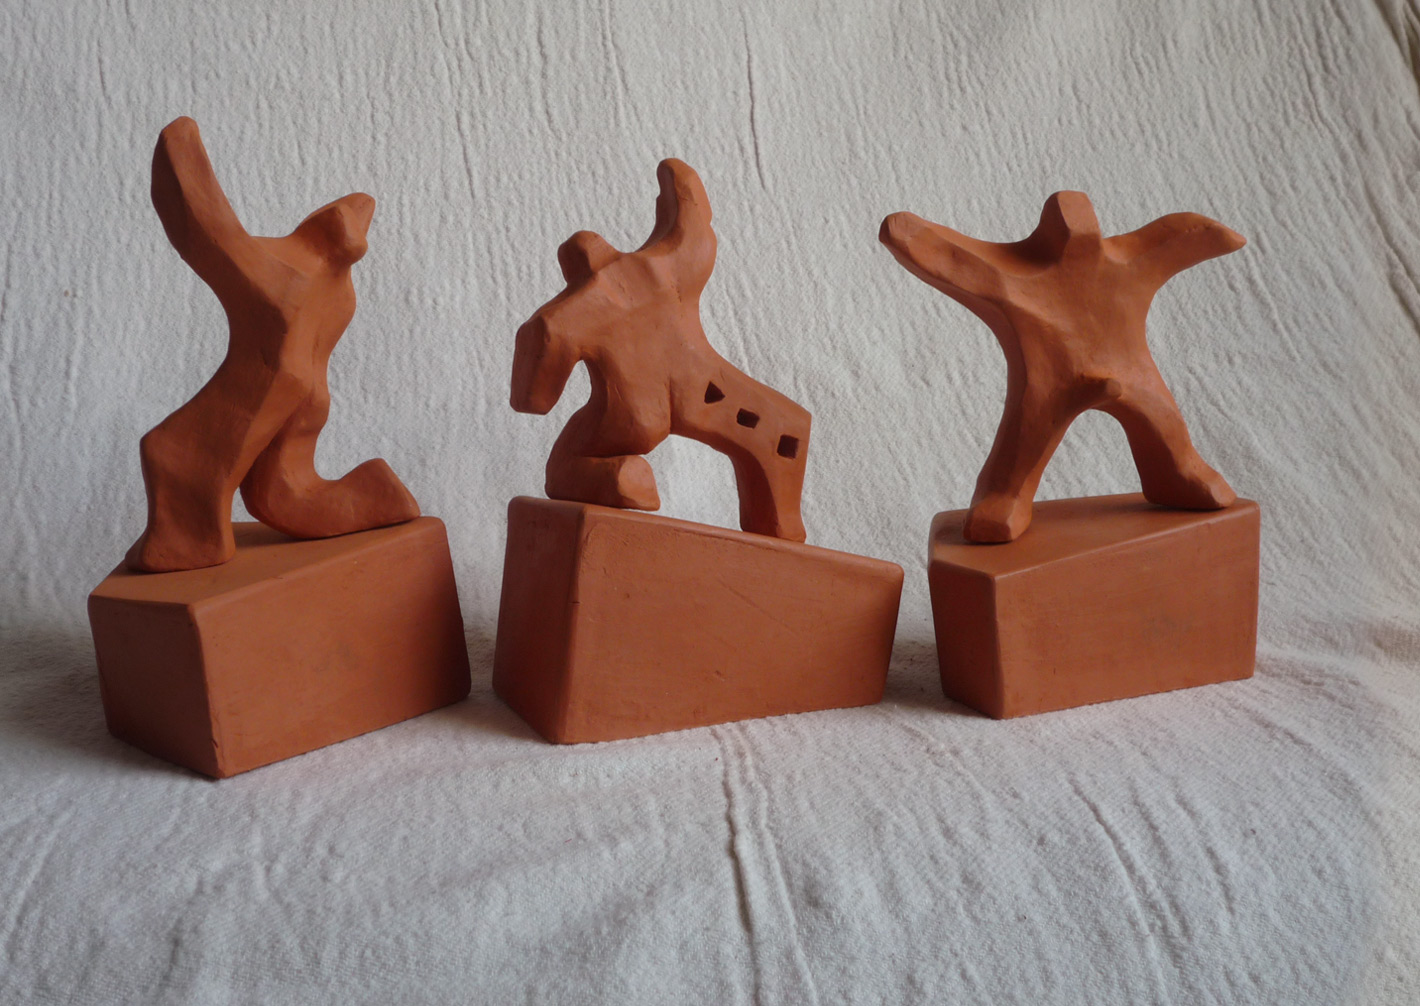 Energetic male figures. Terra-cotta, height approx. 12cm overall